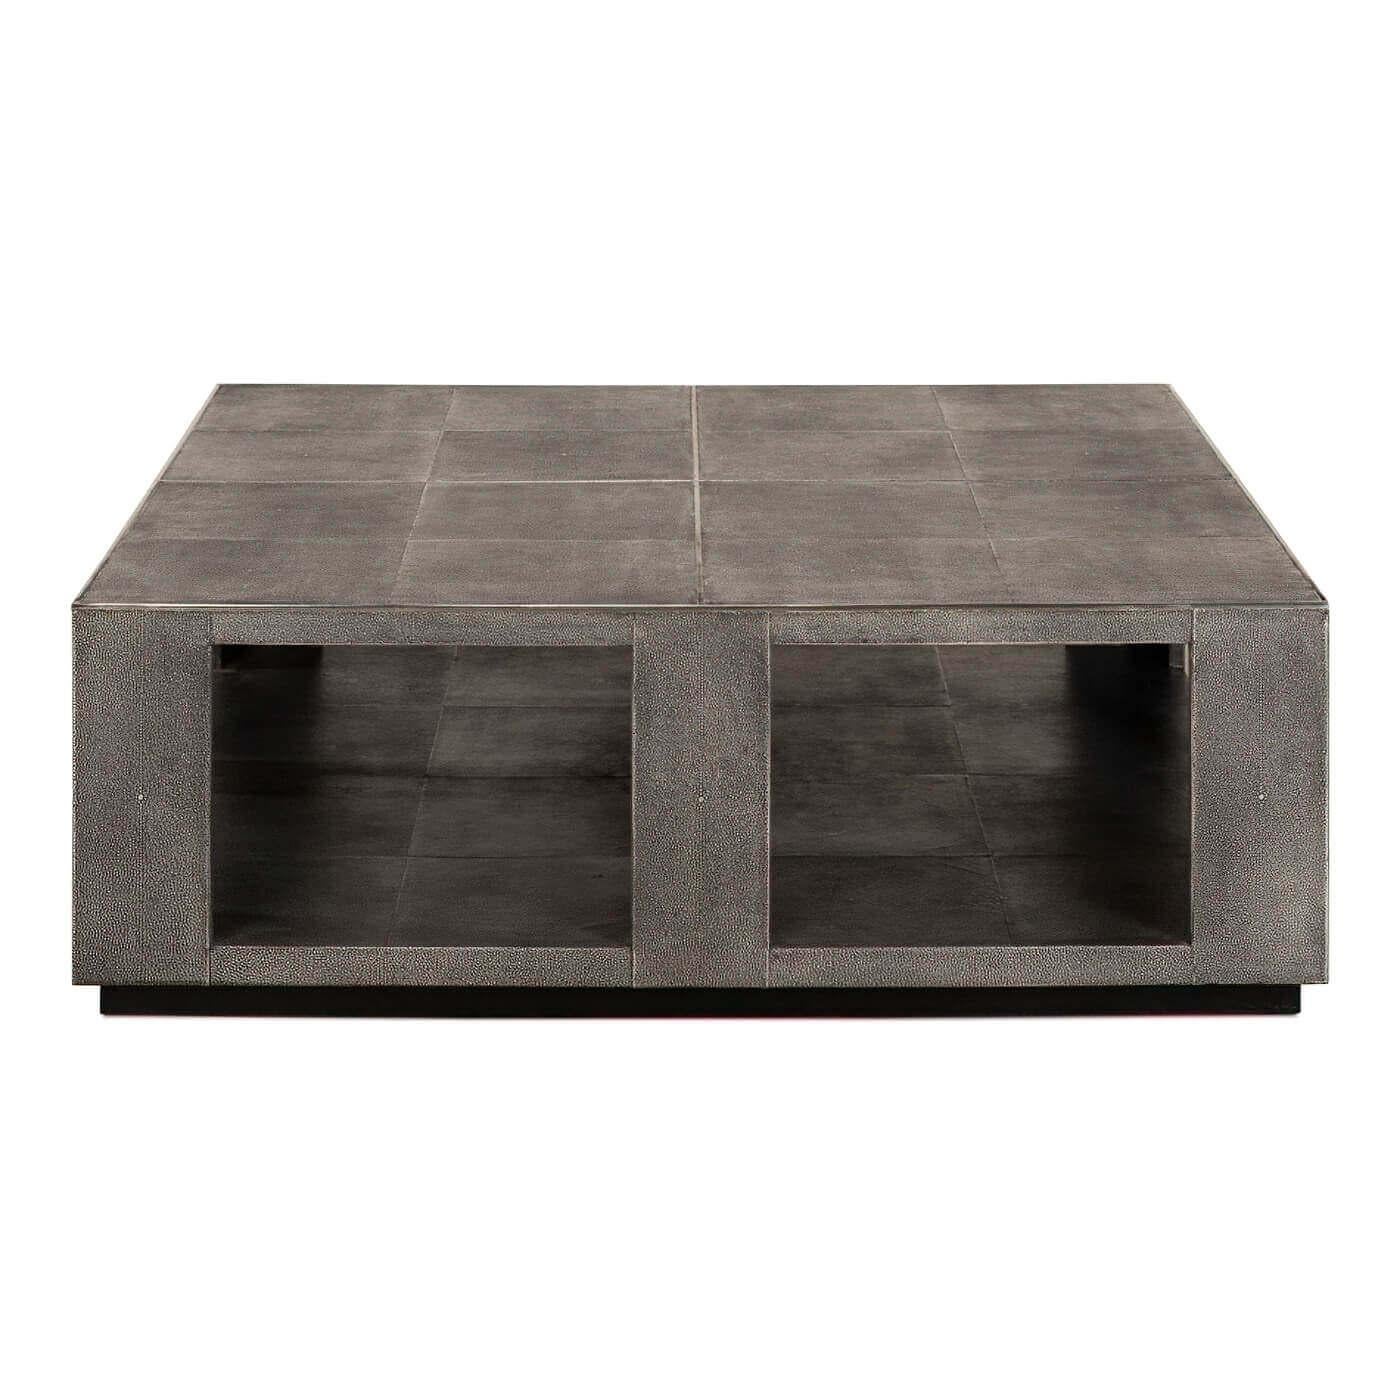 A modern leather square coffee table with stainless steel accents. A sizable coffee table with embossed faux shagreen leather, a lower shelf that is perfect for display and storage. This sleek stylish coffee table rests on a slightly recessed